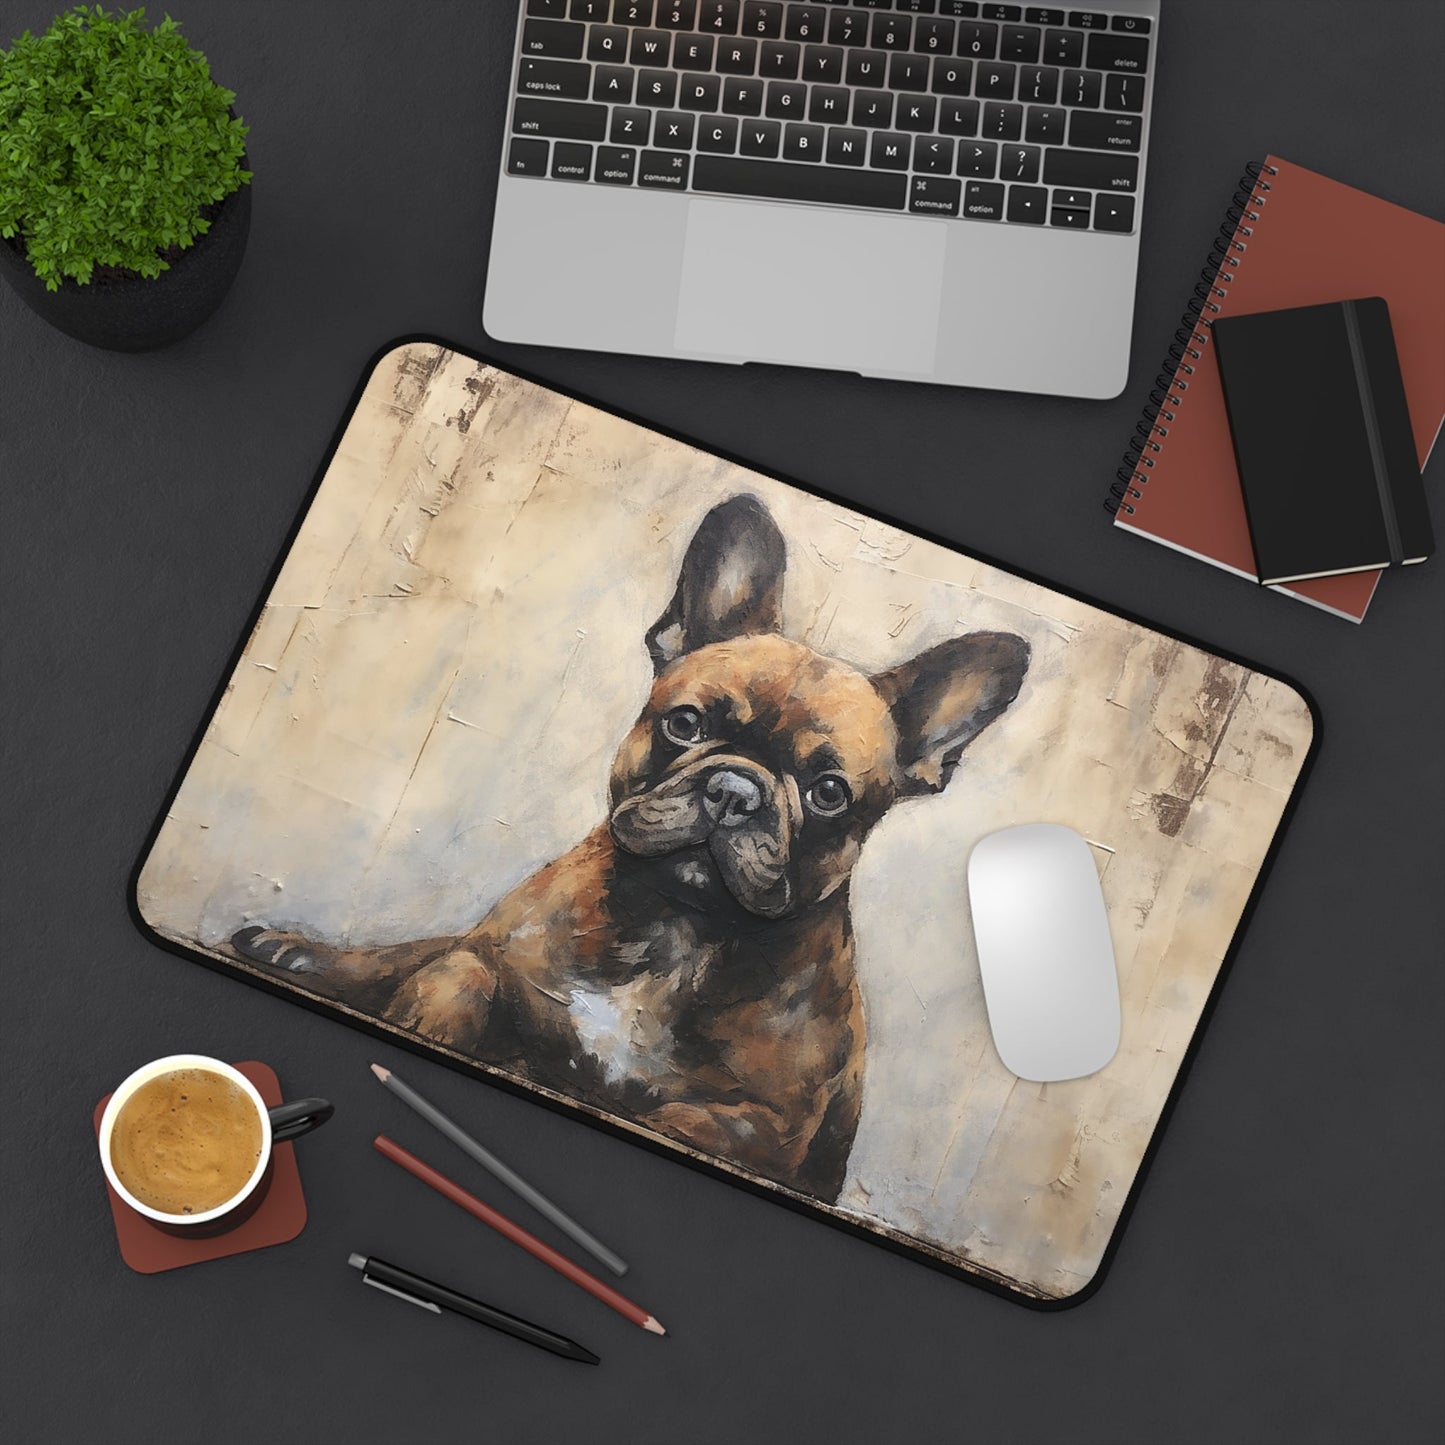 French Bulldog Art Large Mouse Pad, Part of Dog Collection Desk Mats, Gaming, Home Office - FlooredByArt